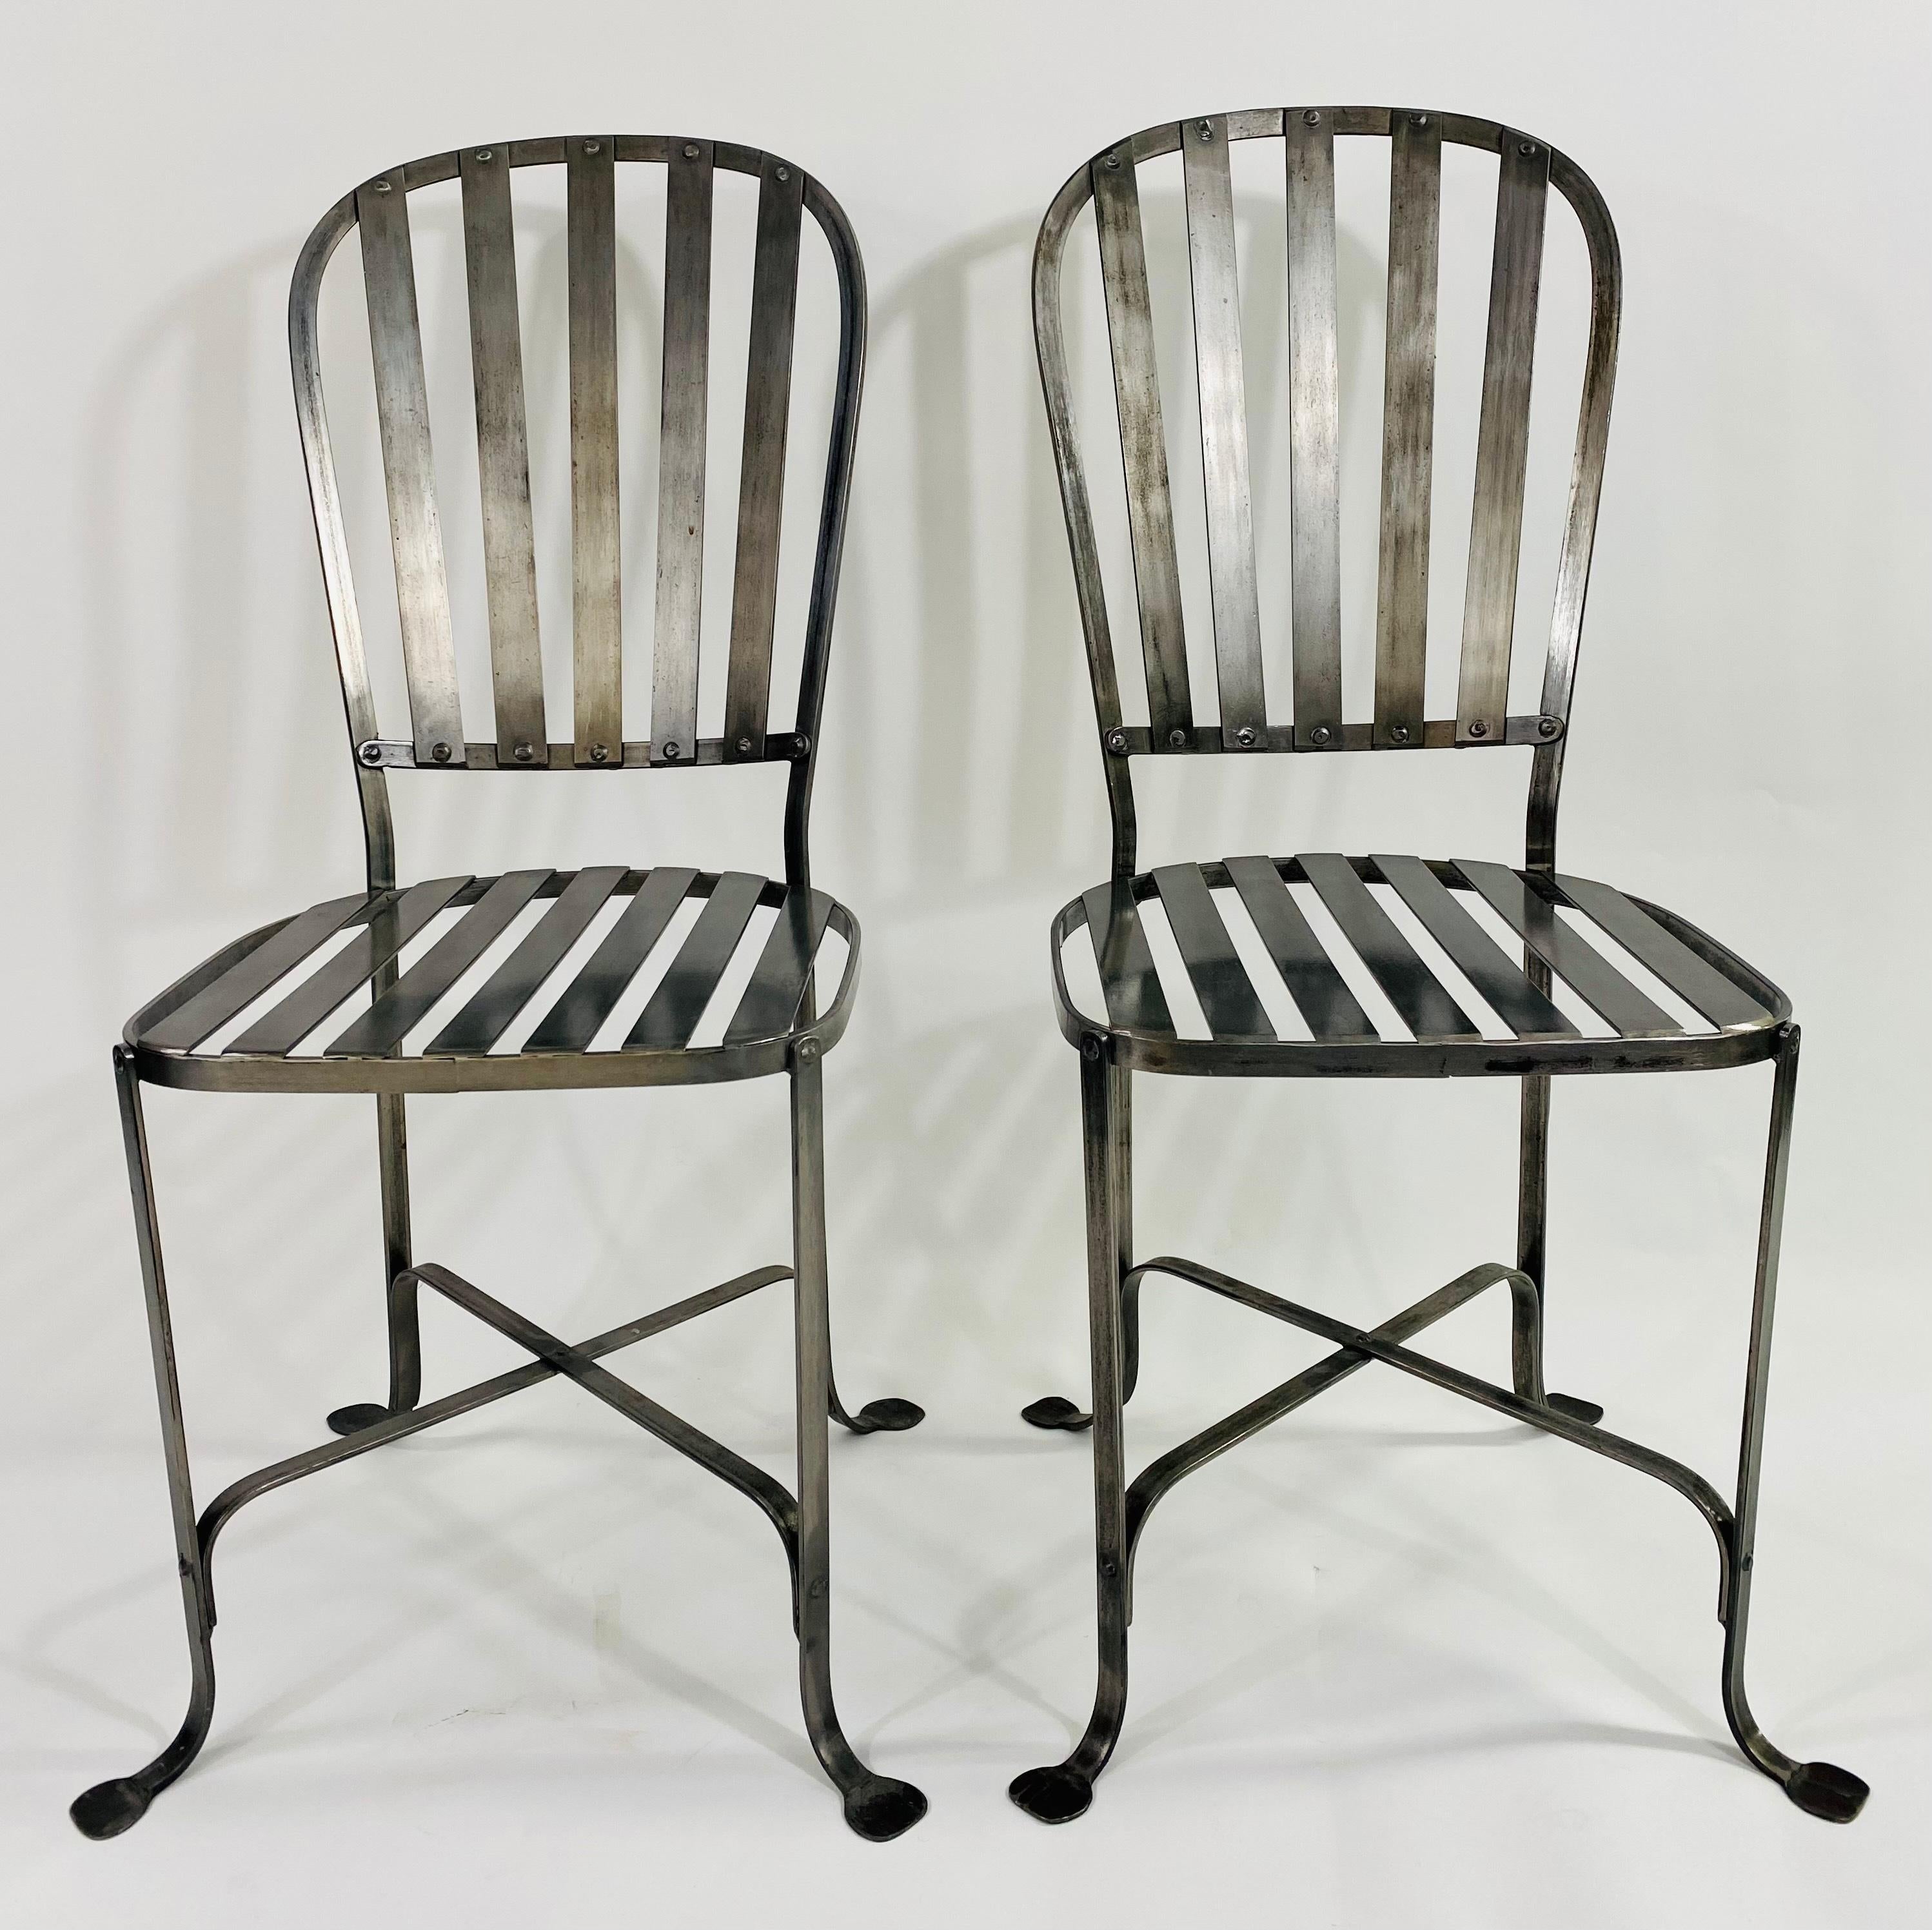 A quality set of 4 mid-century Hollywood Regency style chairs. Finely crafted of metal in pewter finish, the chairs are sturdy and can be used for indoor as well as outdoor. Beautifully designed, the chairs feature an X shaped support and elegant